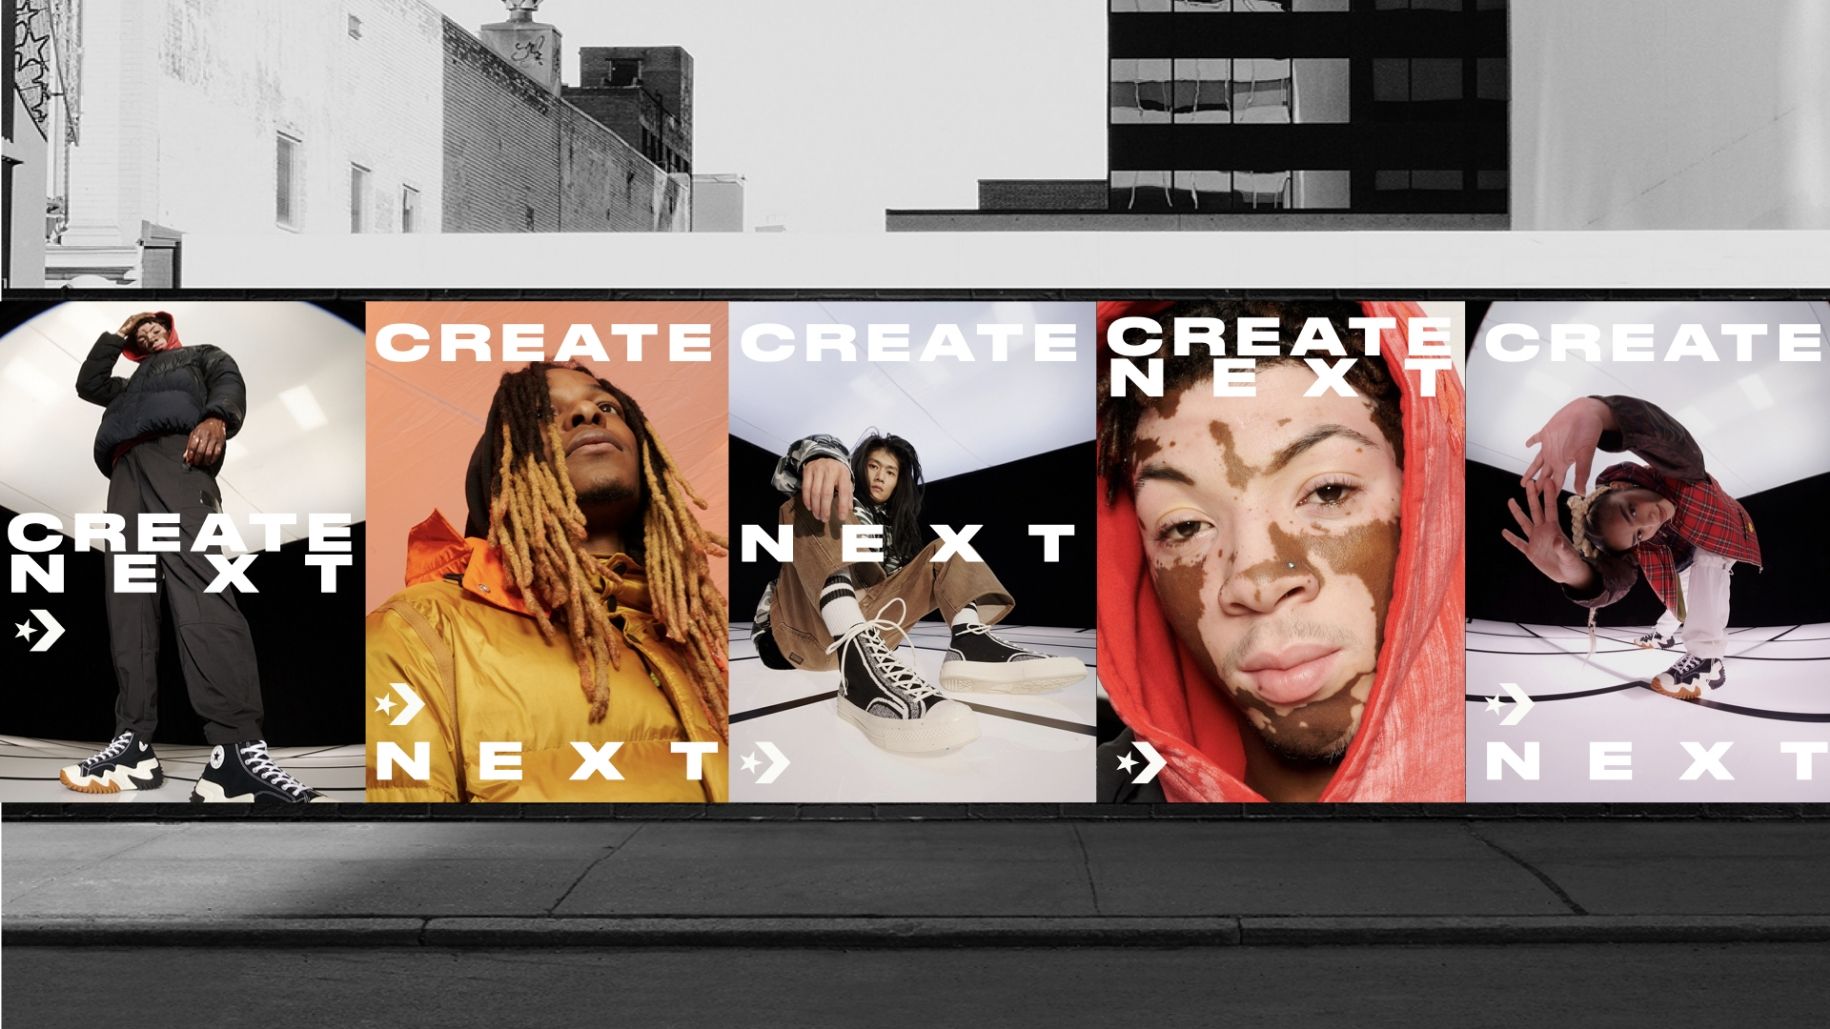 5 Create Next Posters rendered next to each other against black and white city wall. All Read Create Next with individuals standing, sitting or close up on face